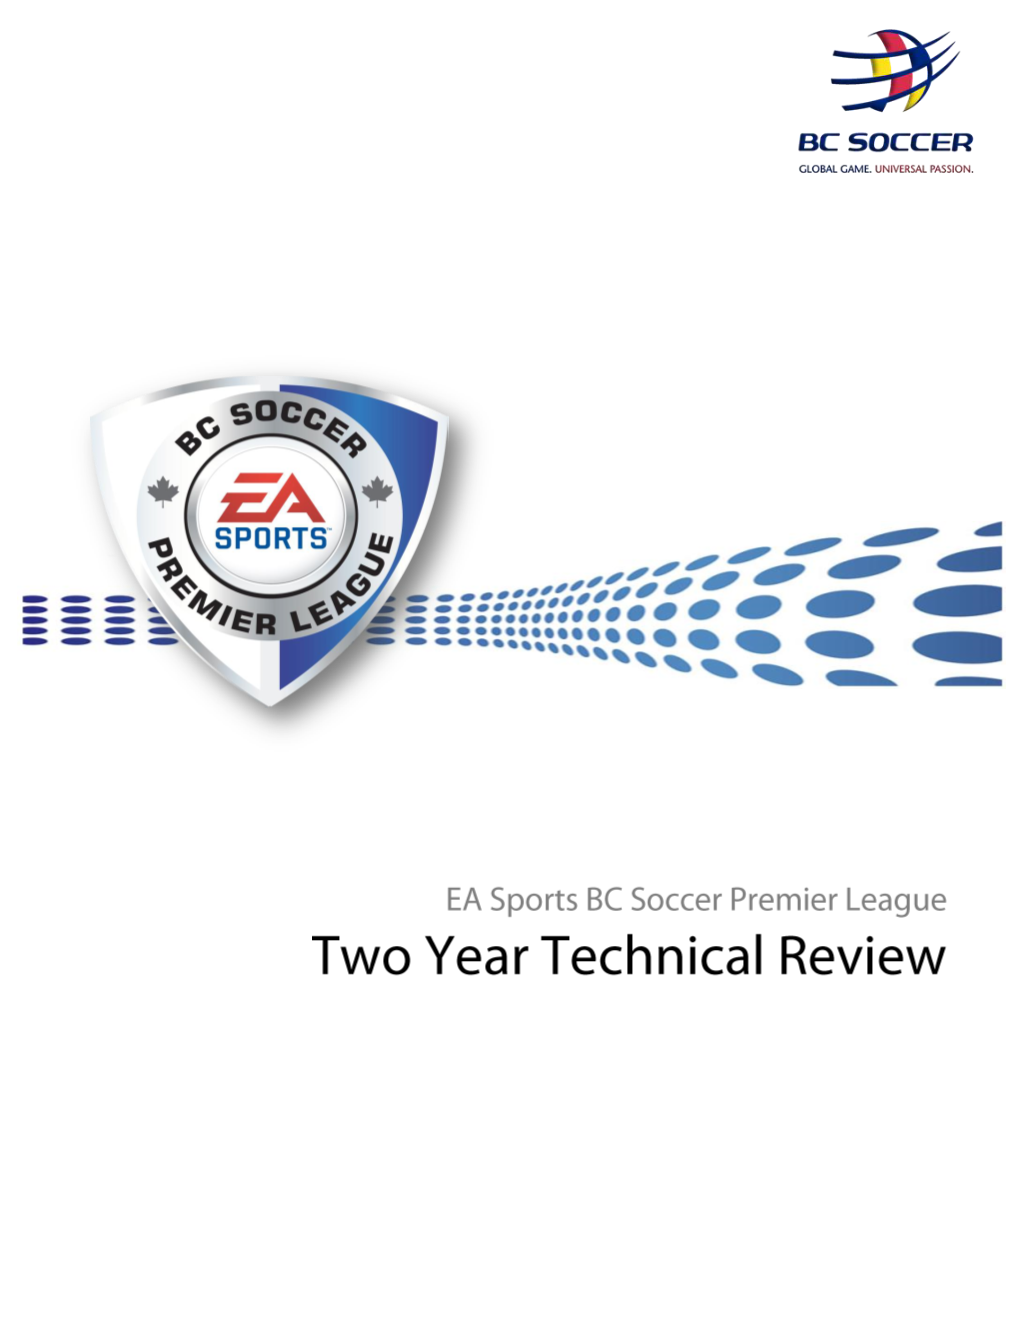 EA SPORTS BC SOCCER PREMIER LEAGUE TWO YEAR TECHNICAL REVIEW DRAFT.Docx